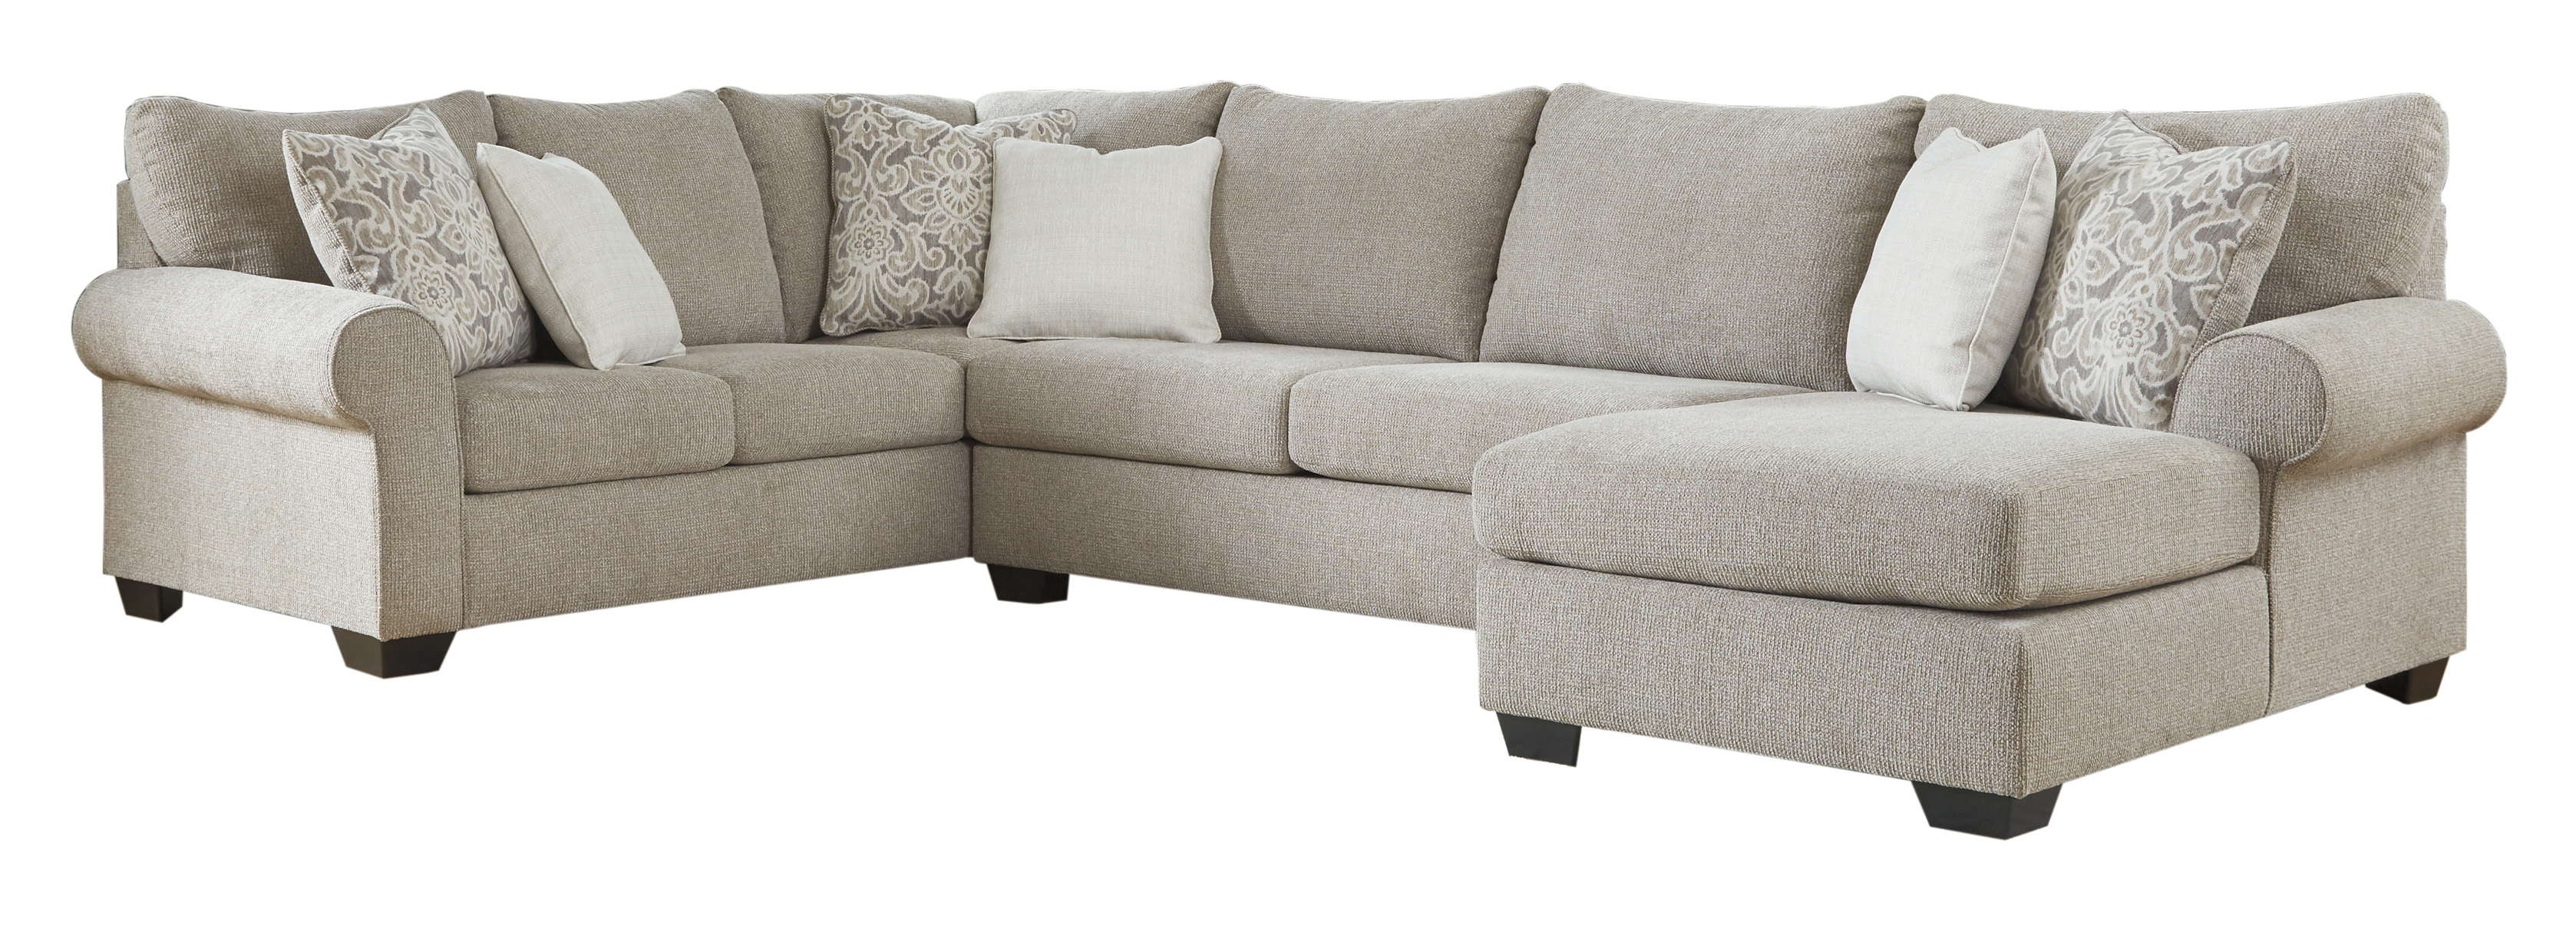 Benchcraft® Baranello Stone 3-Piece Sectional with Chaise